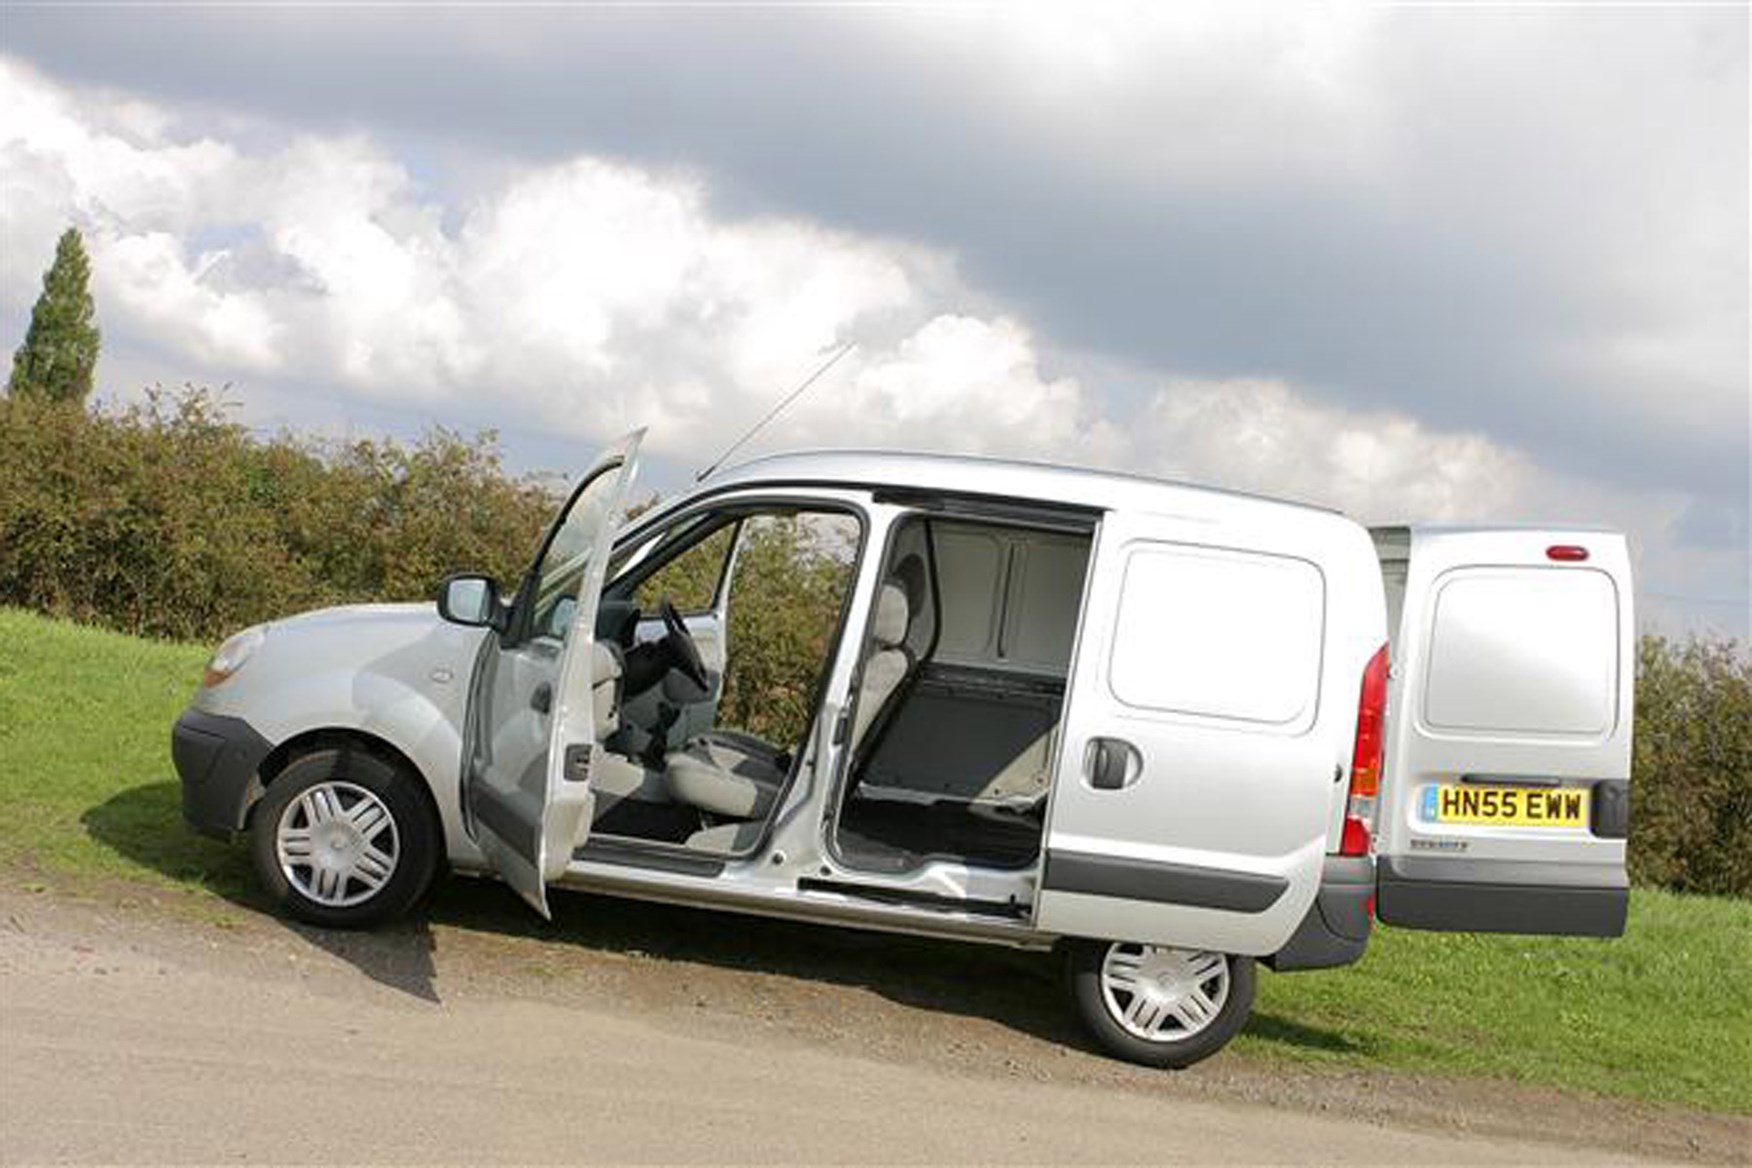 Renault Kangoo review on Parkers Vans - load area access